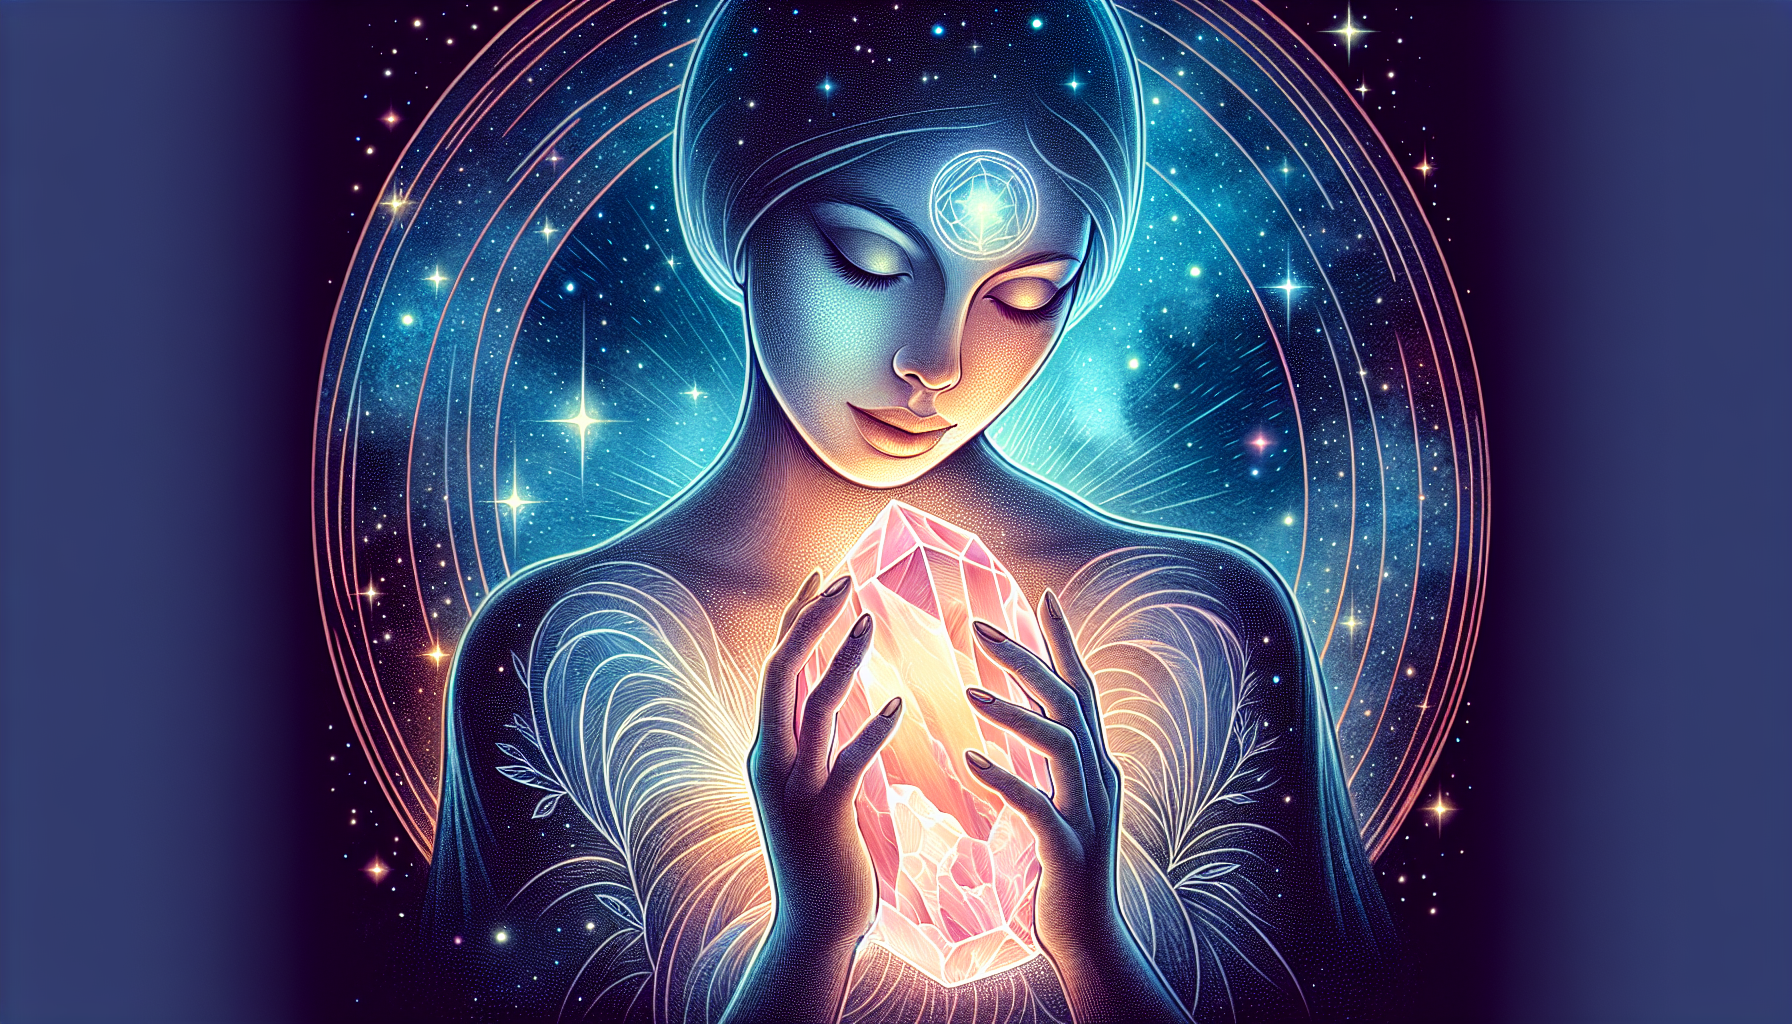 Illustration of a person holding a rose quartz crystal over their heart